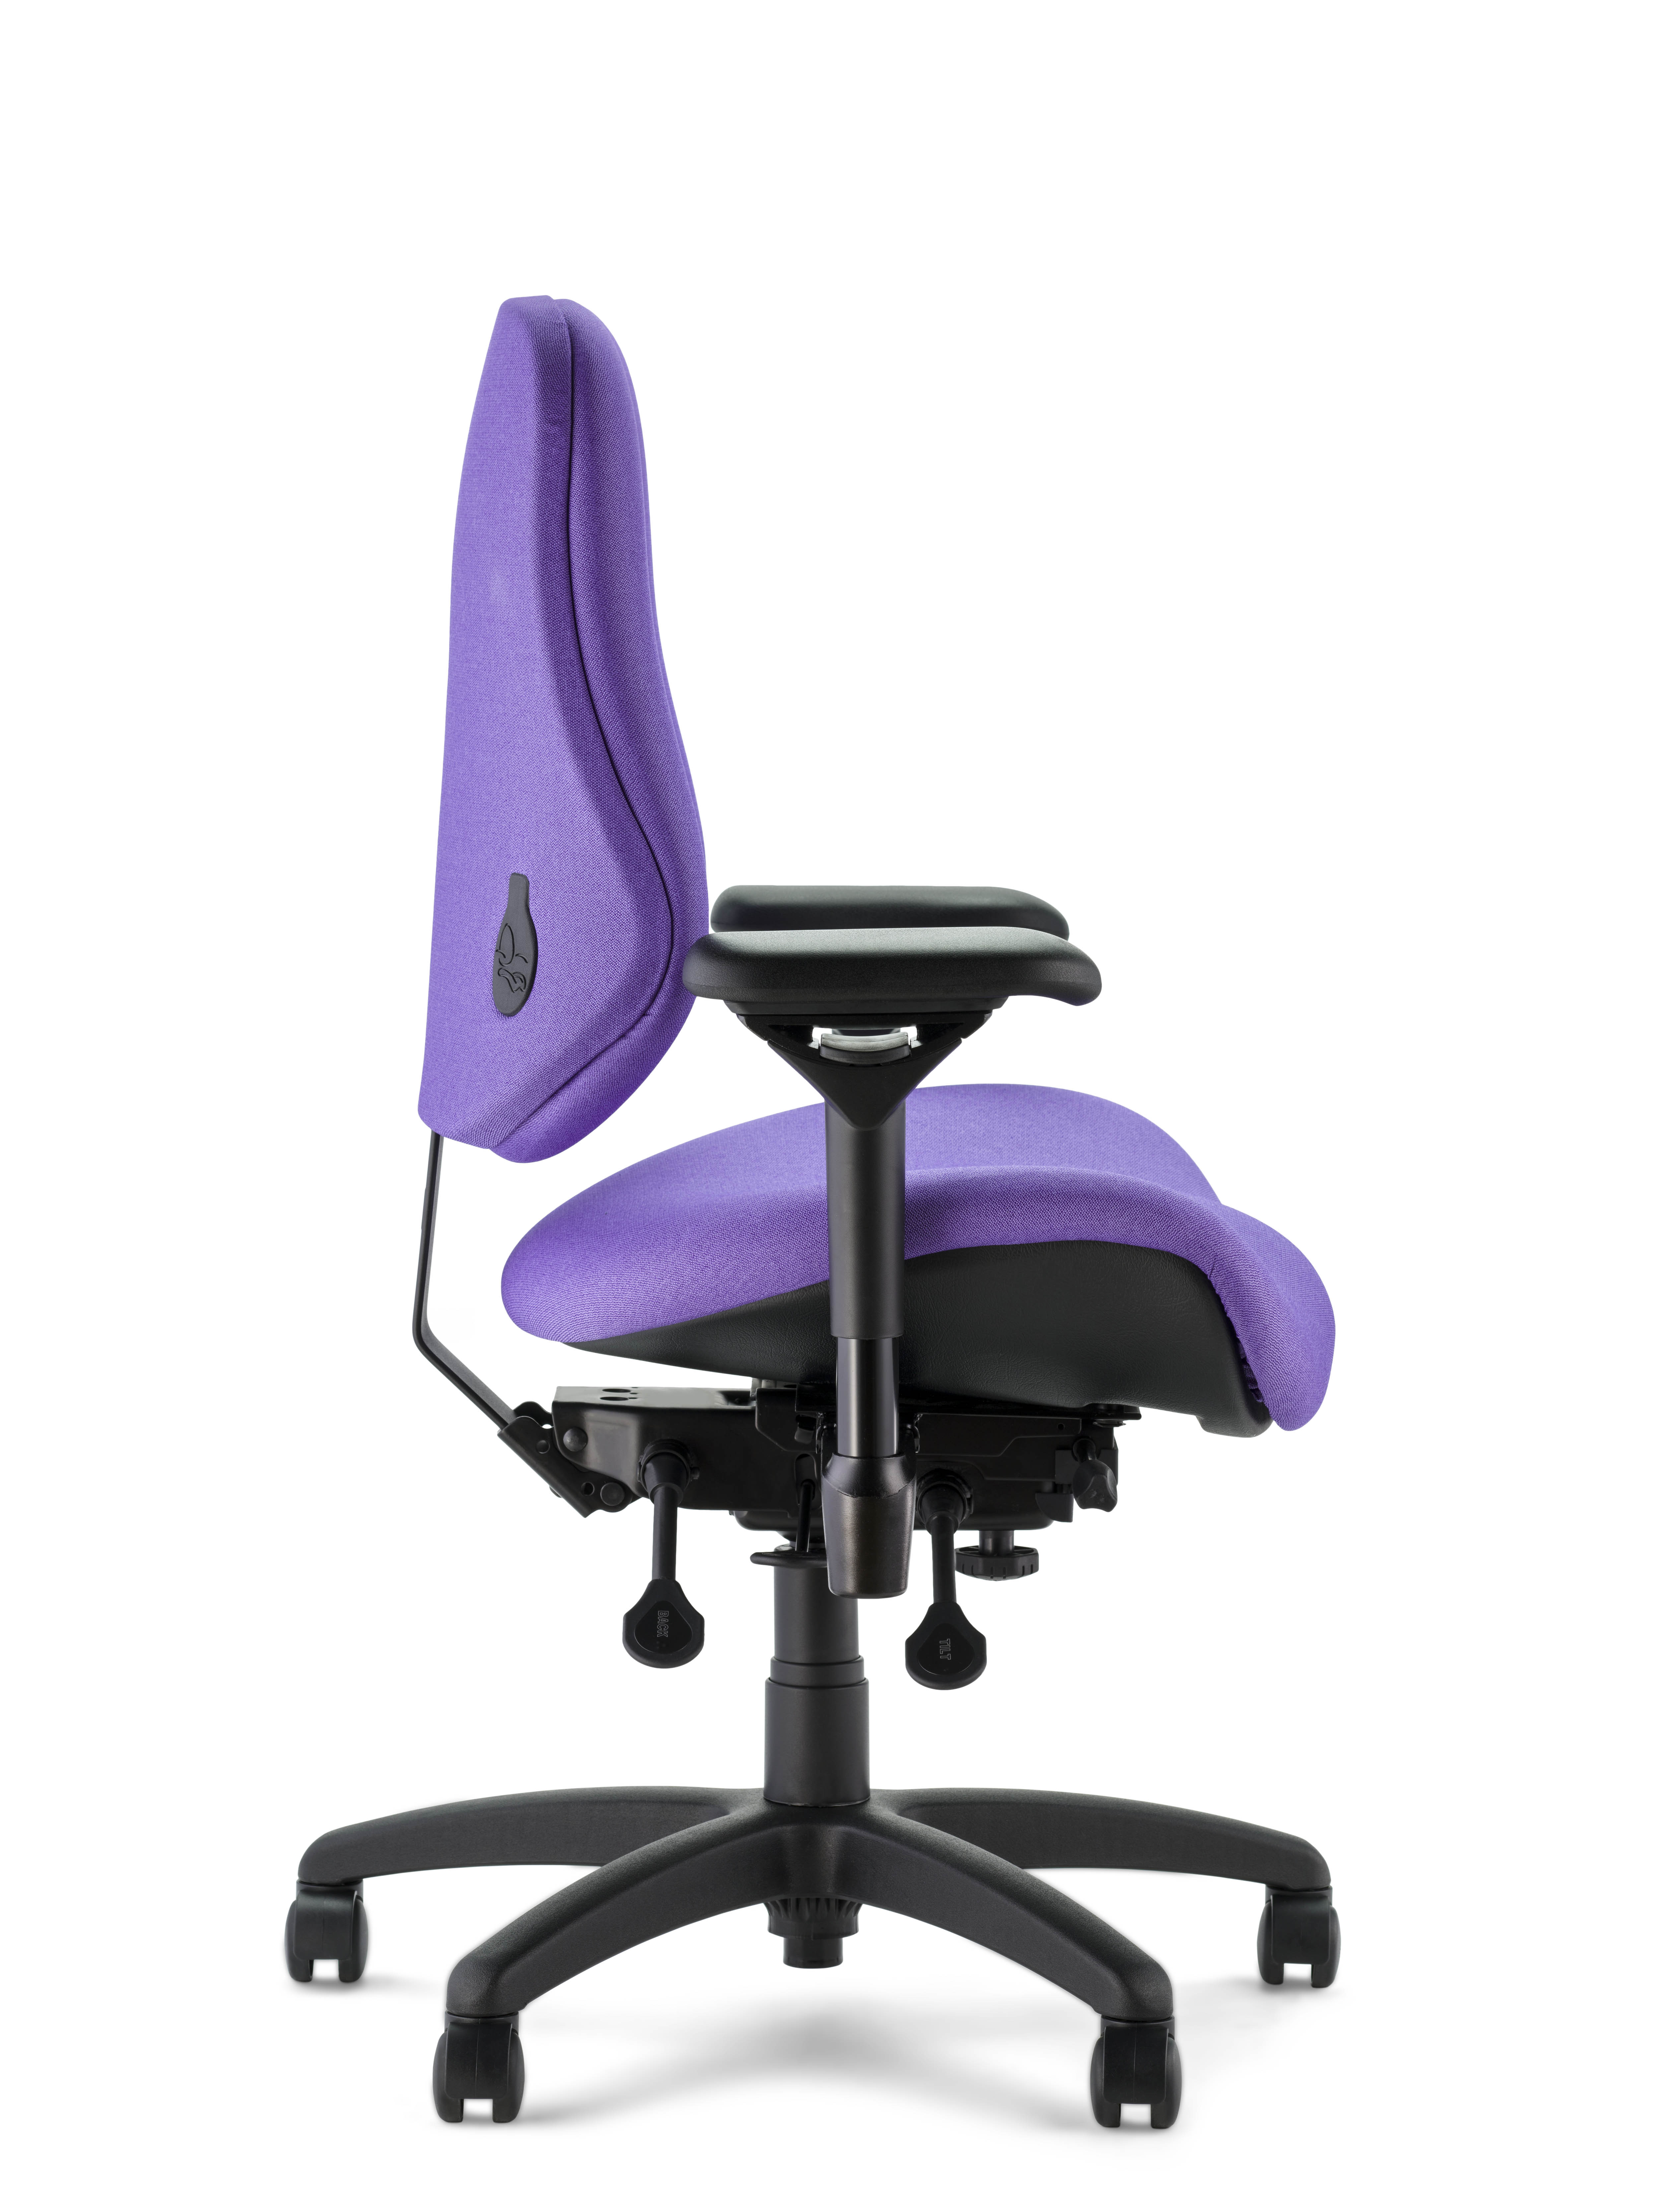 J2504 task chair infinity Hyacinth right side view